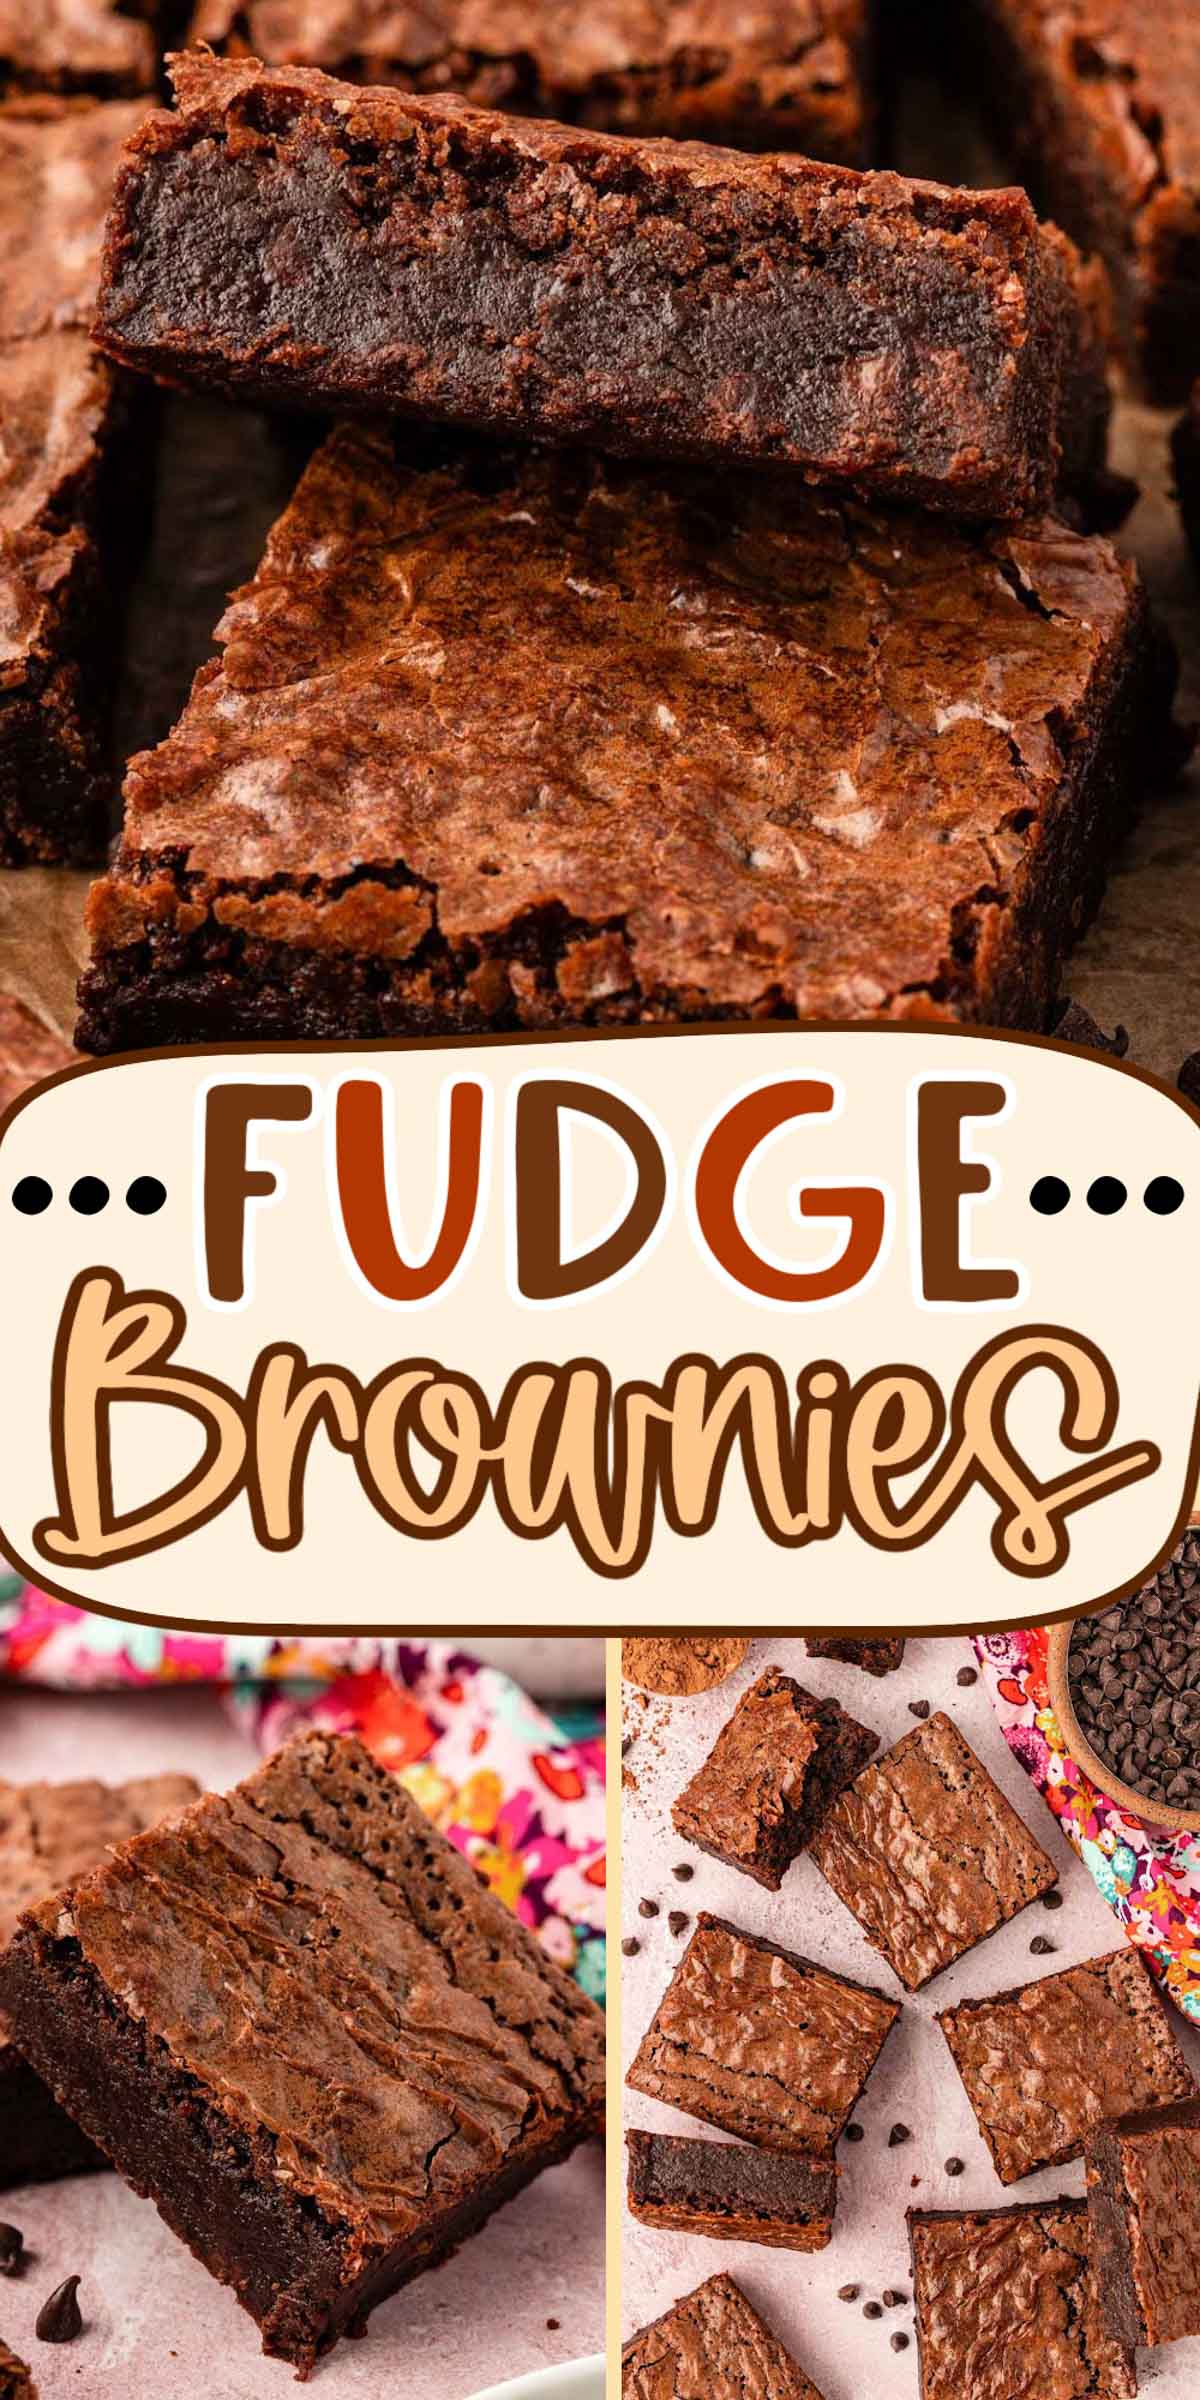 These Classic Homemade Fudge Brownies are officially crowned as the BEST classic brownie, achieved with simple ingredients and a one pot stovetop method! This recipe is packed with a drool-worthy chocolate flavor! via @sugarandsoulco